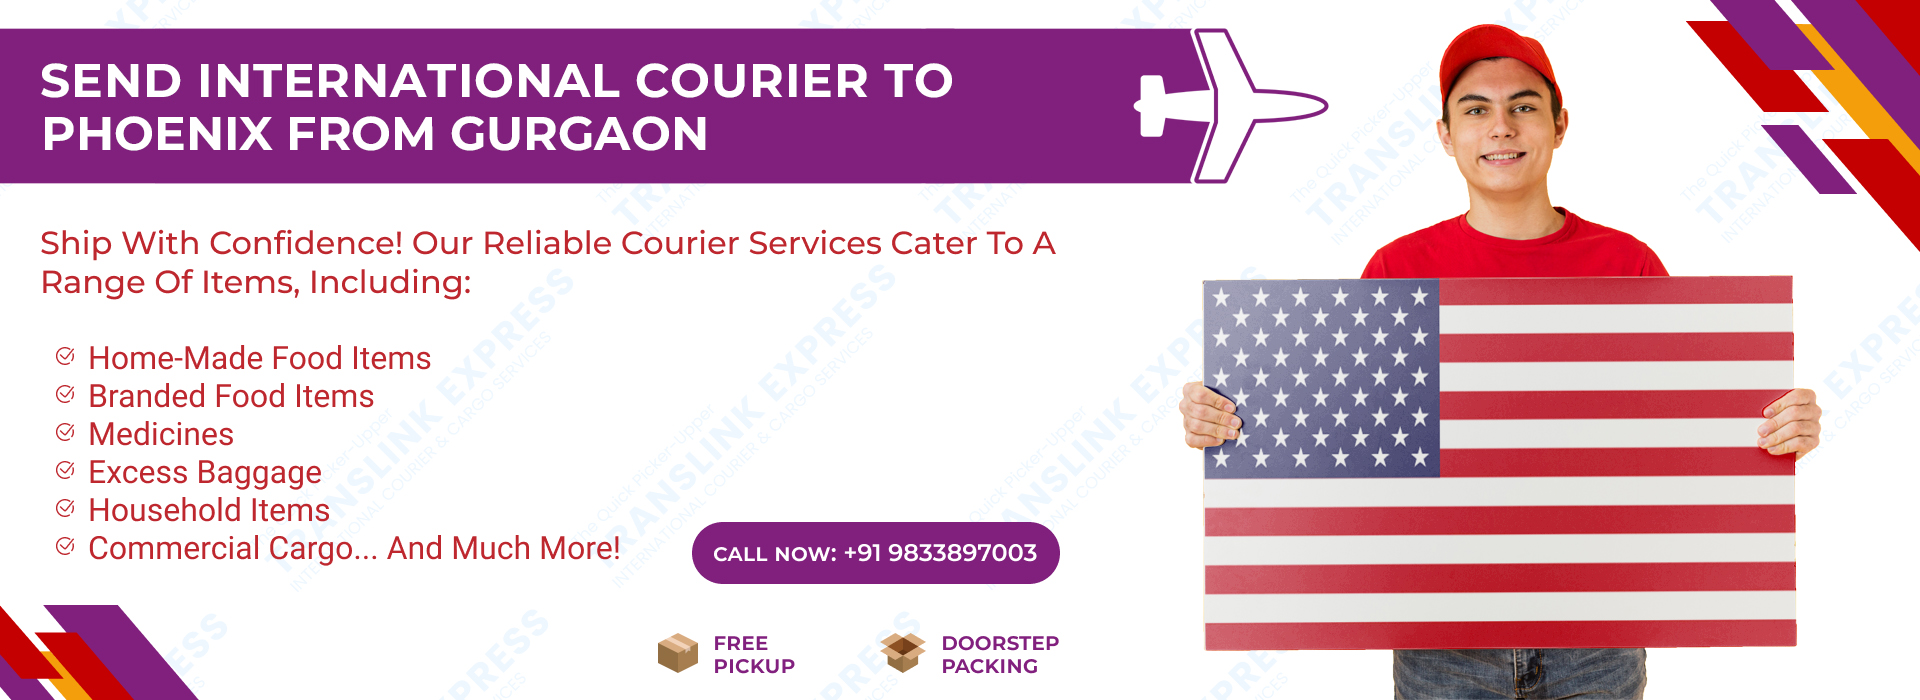 Courier to Phoenix From Gurgaon